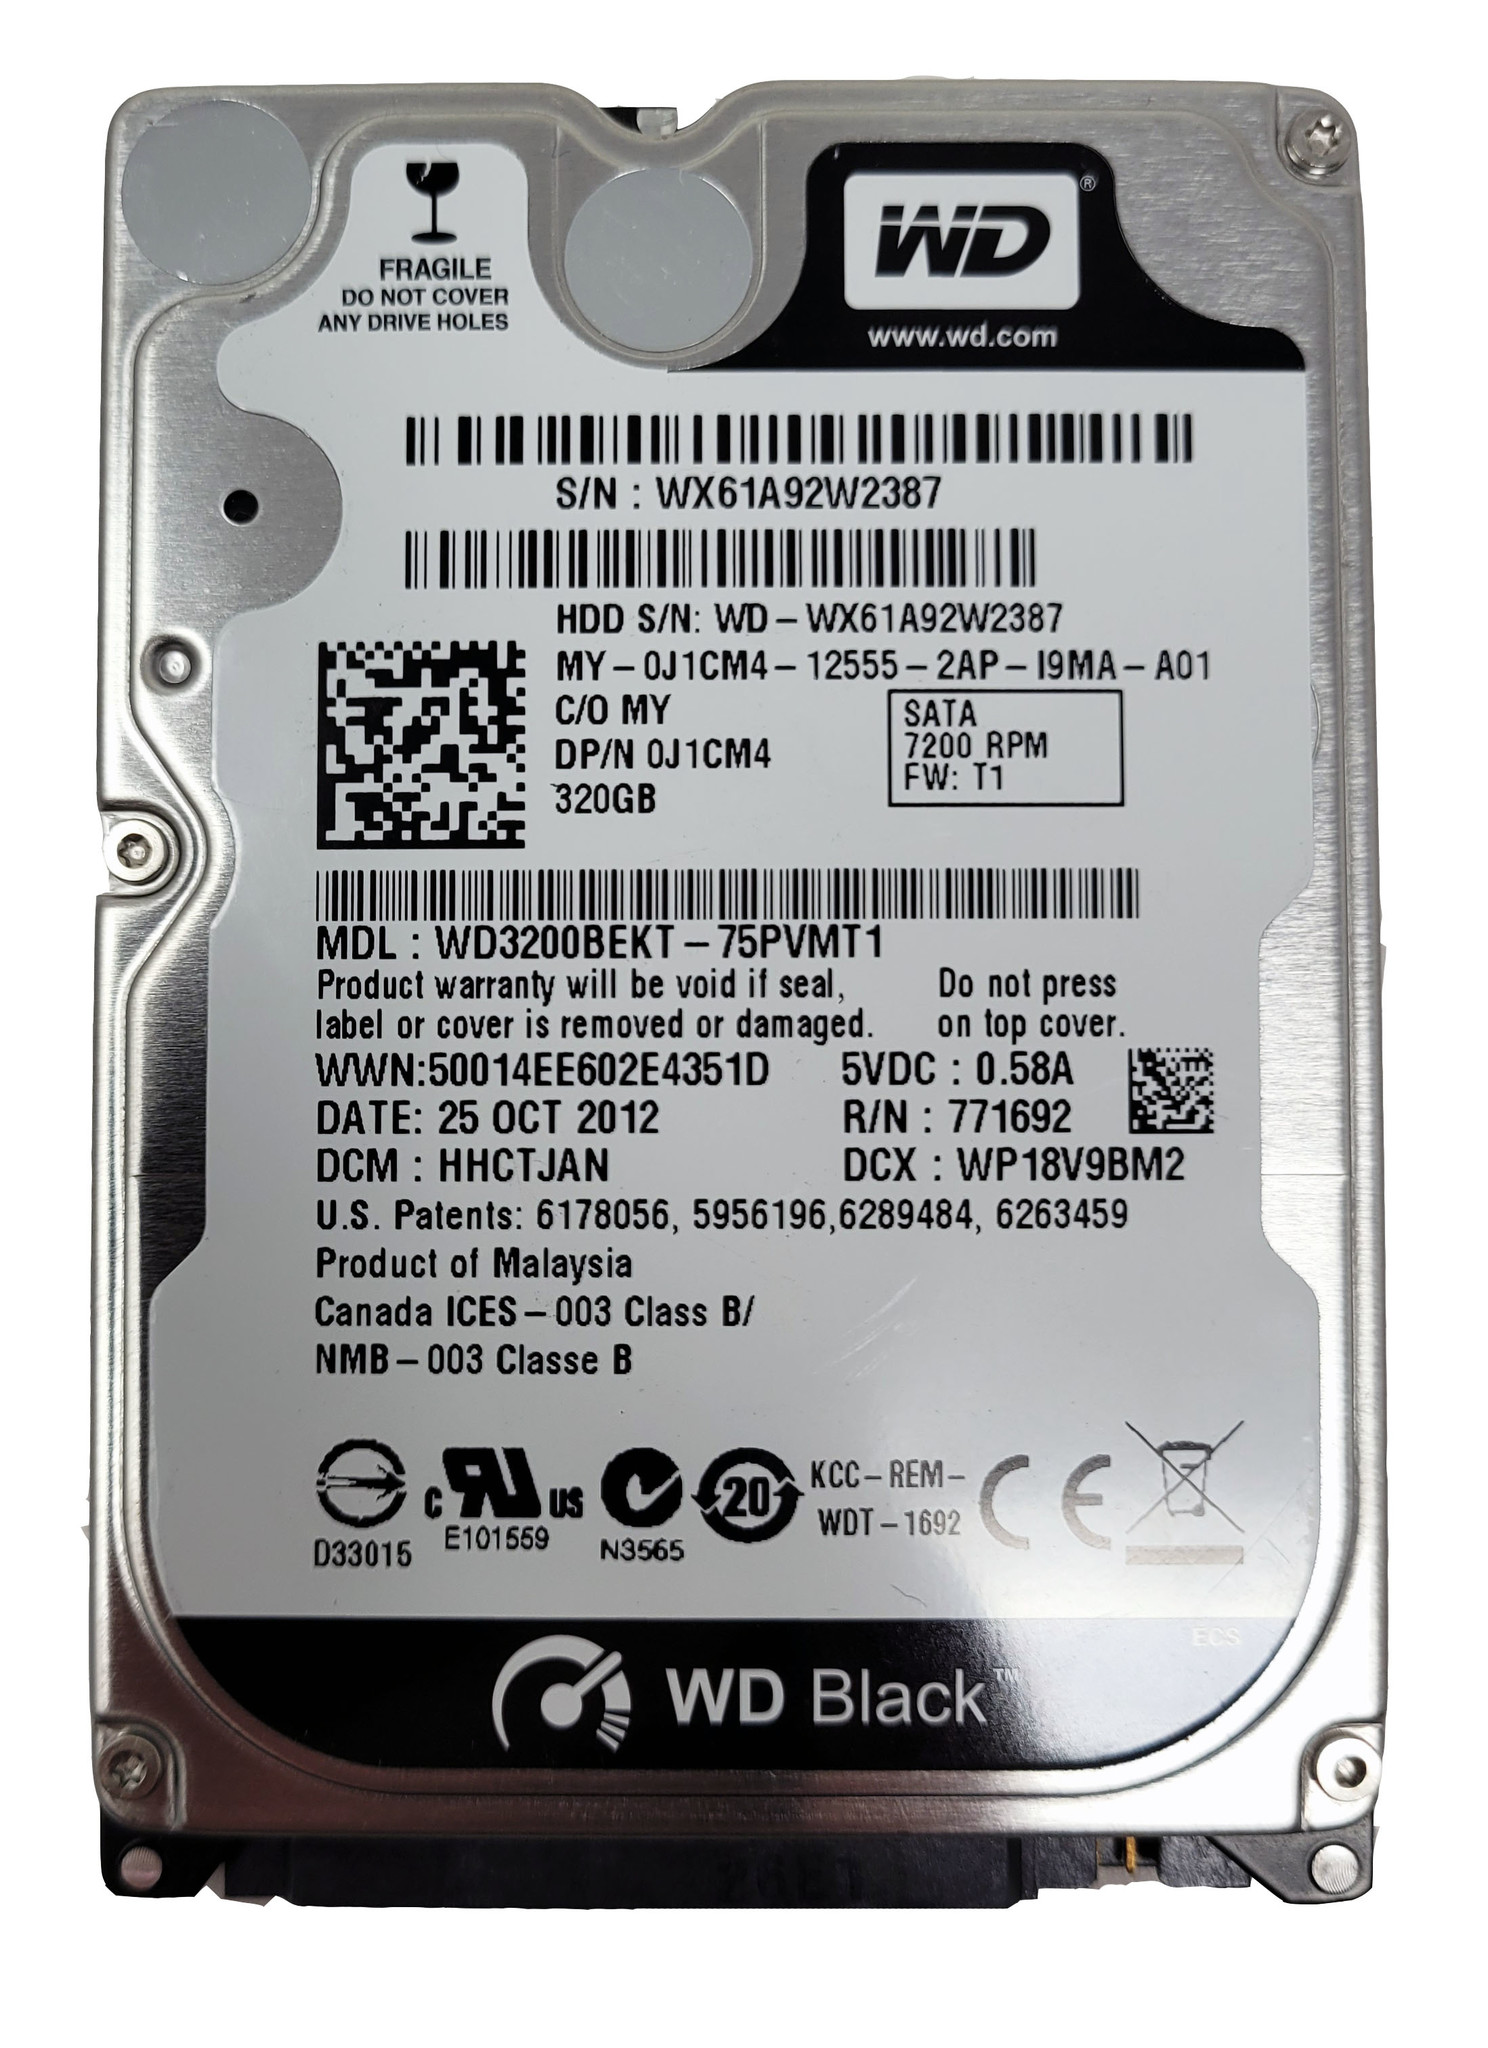 Northern Mastery vride 320GB 2.5" Internal Hard Drive For Laptop/External Enclosure - NWCA Inc.